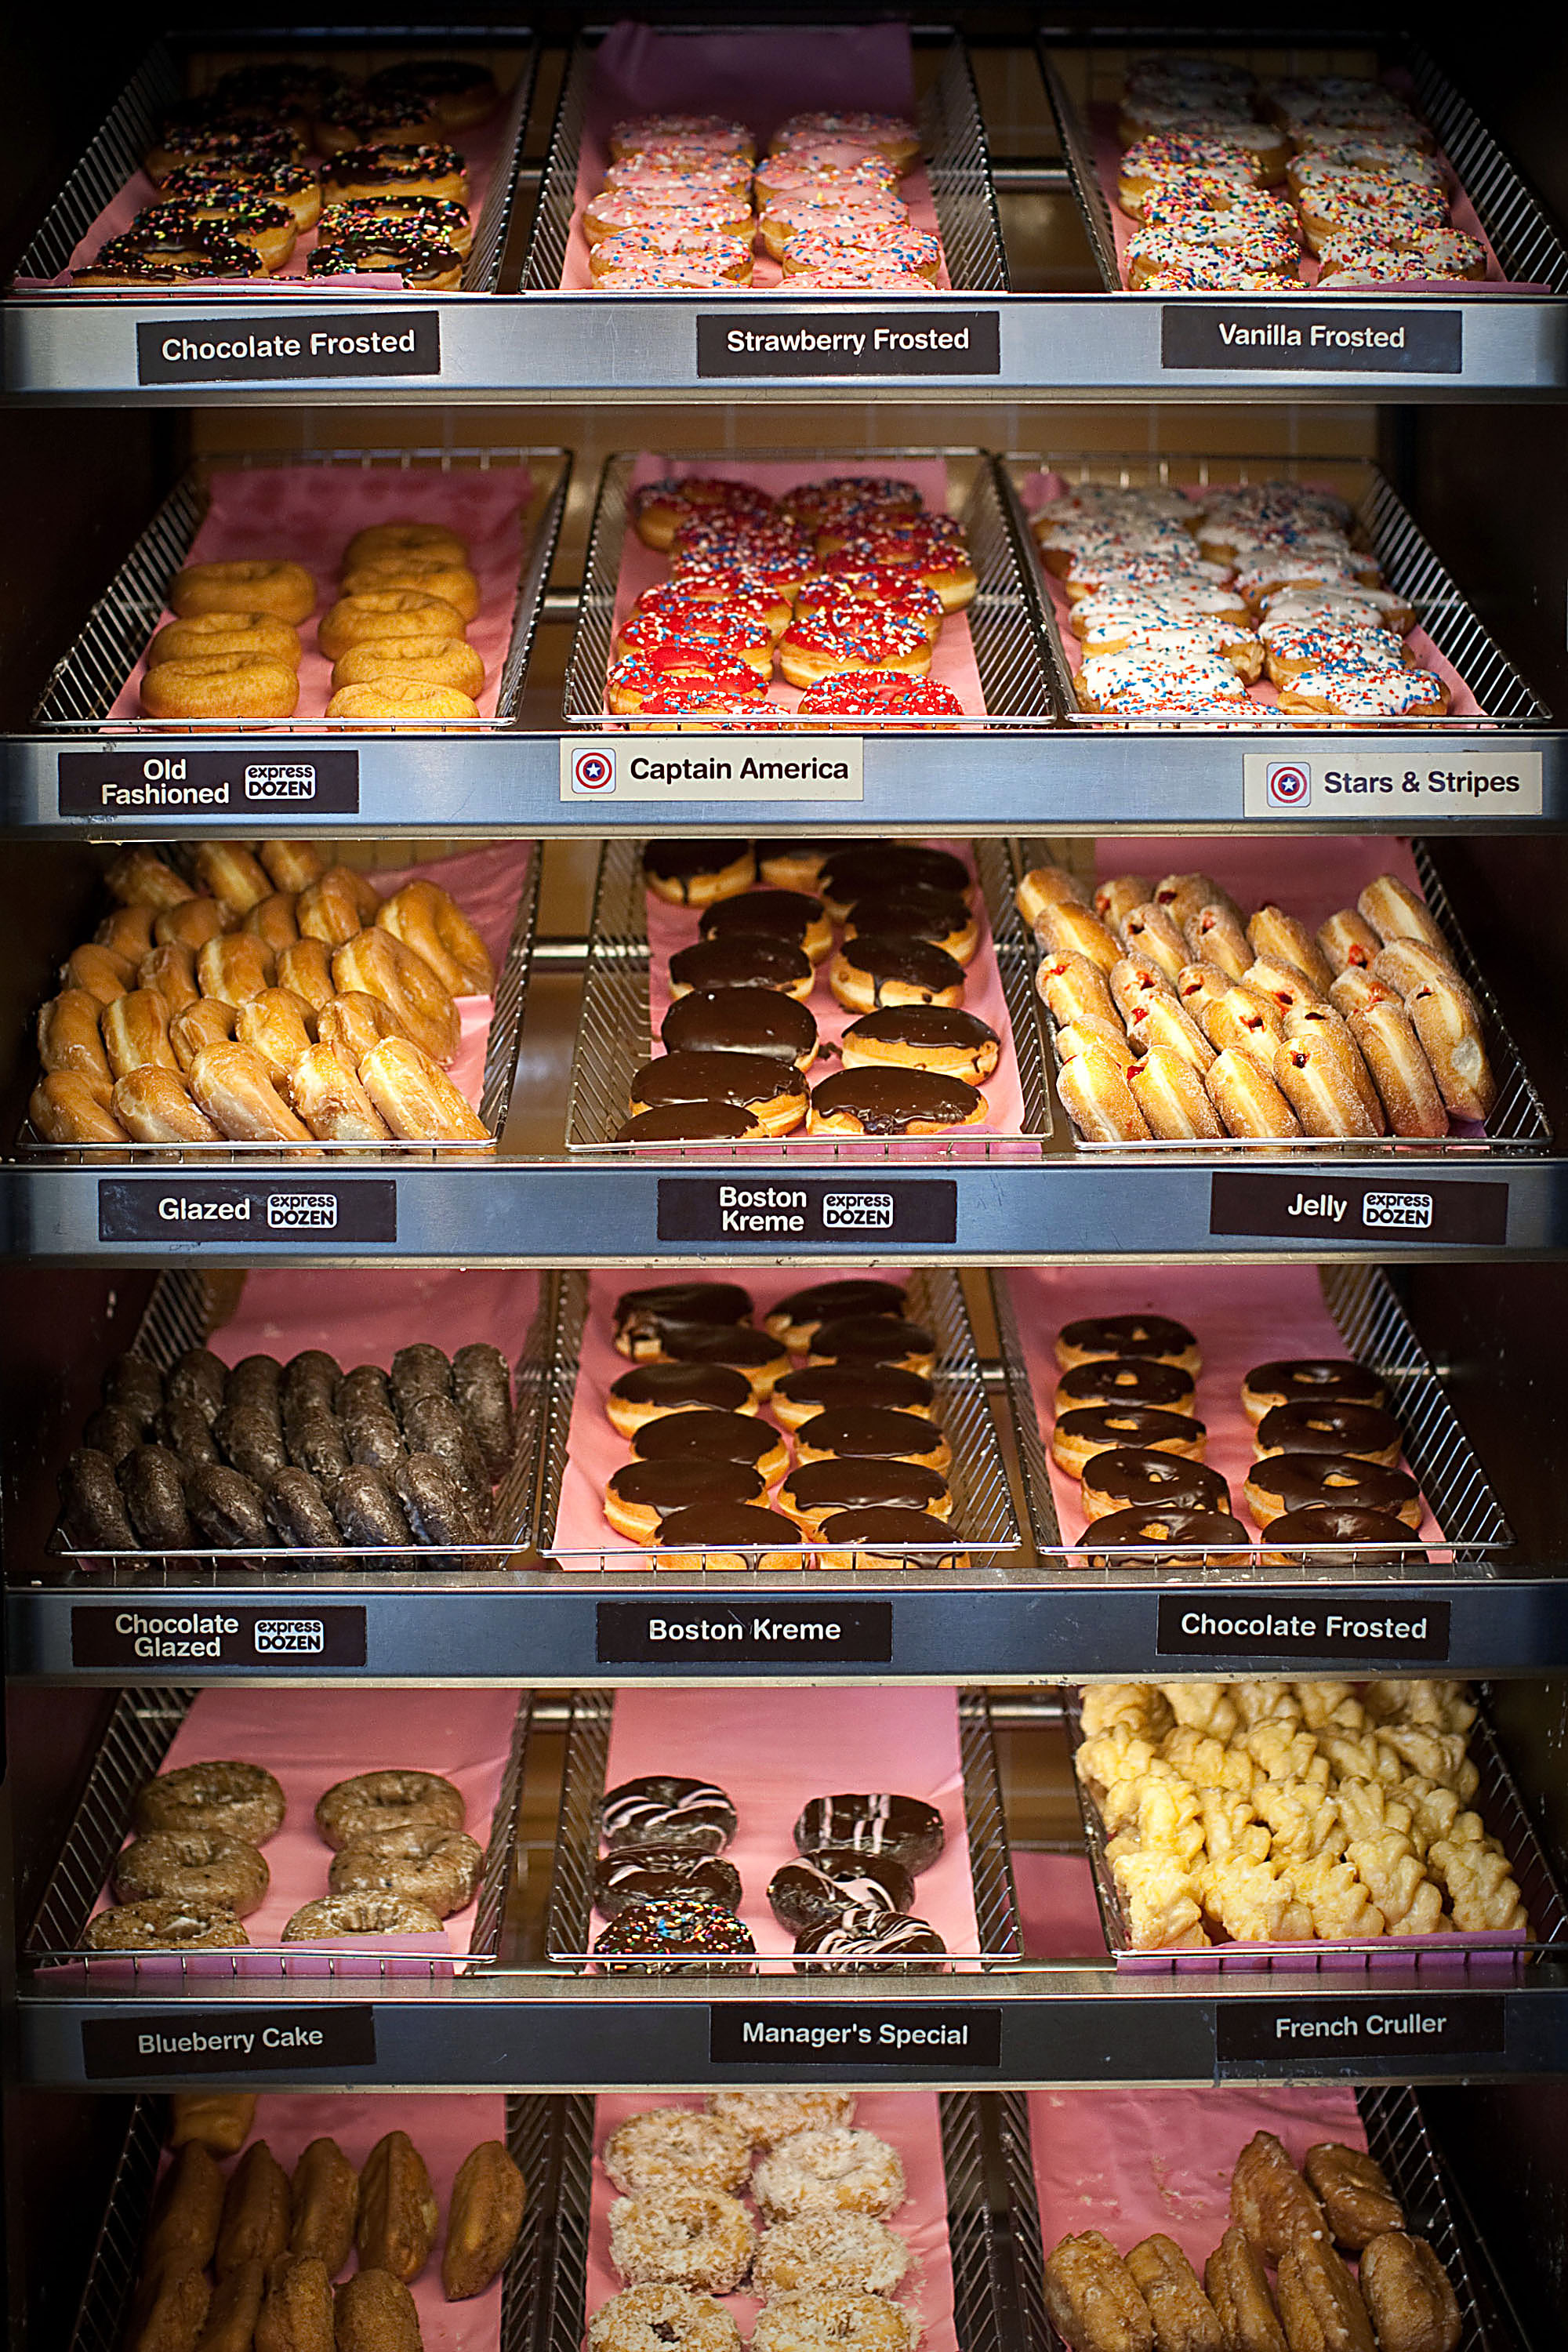 Dunkin’ to Sell Gluten-Free Doughnuts in Fast-Food First - Bloomberg